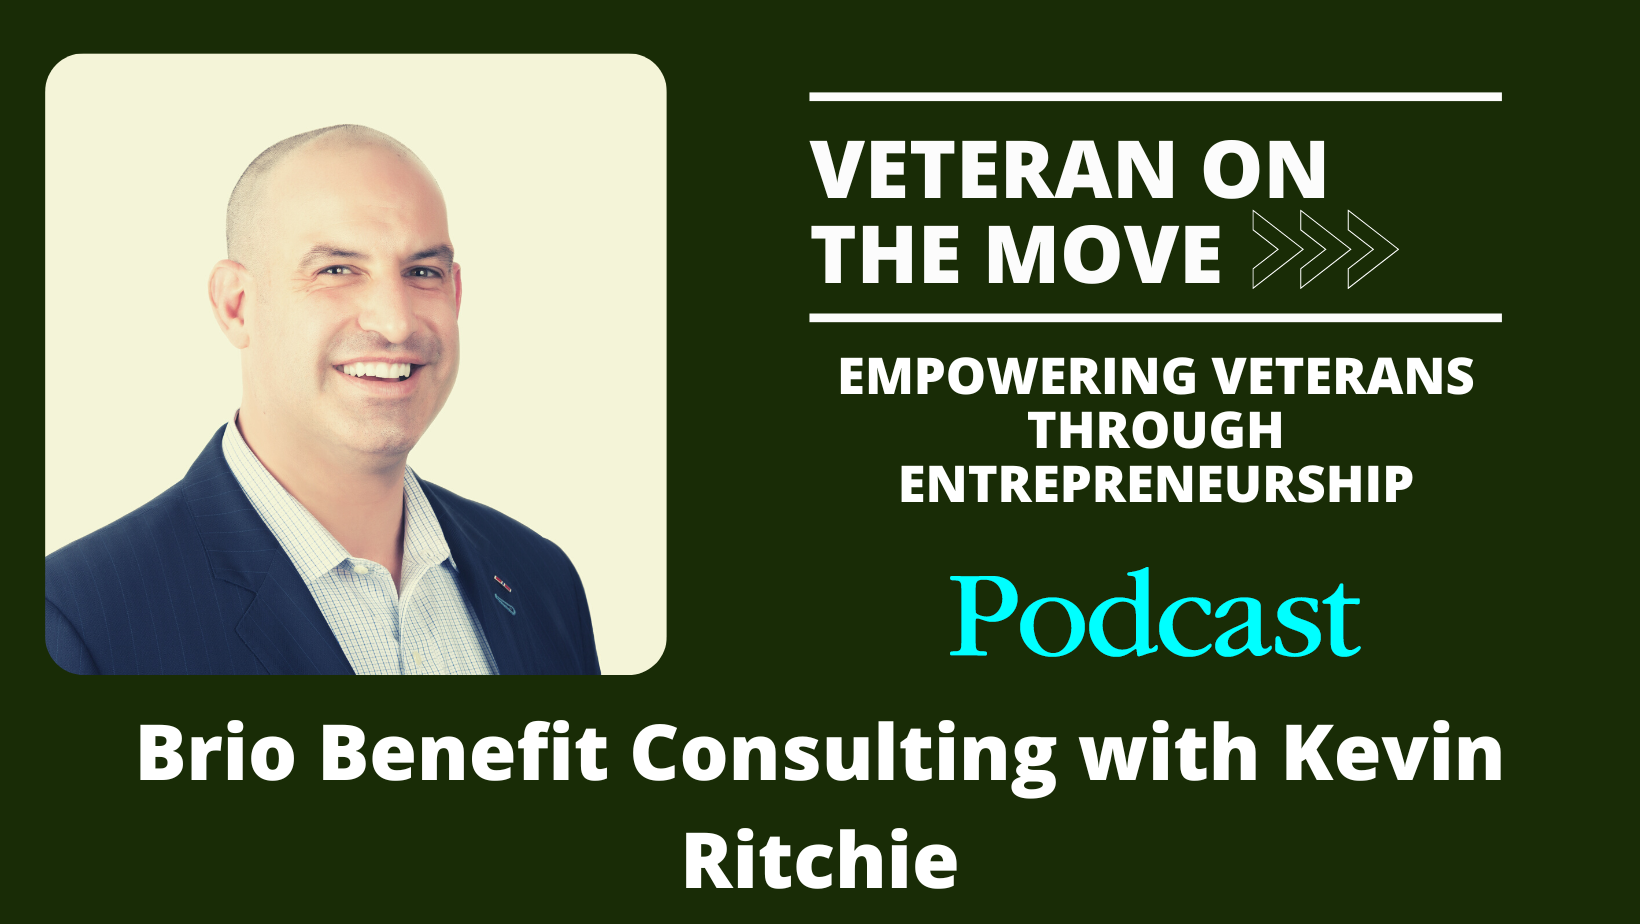 Veterans on the Move Podcast: Brio Benefits Consulting with Kevin Ritchie